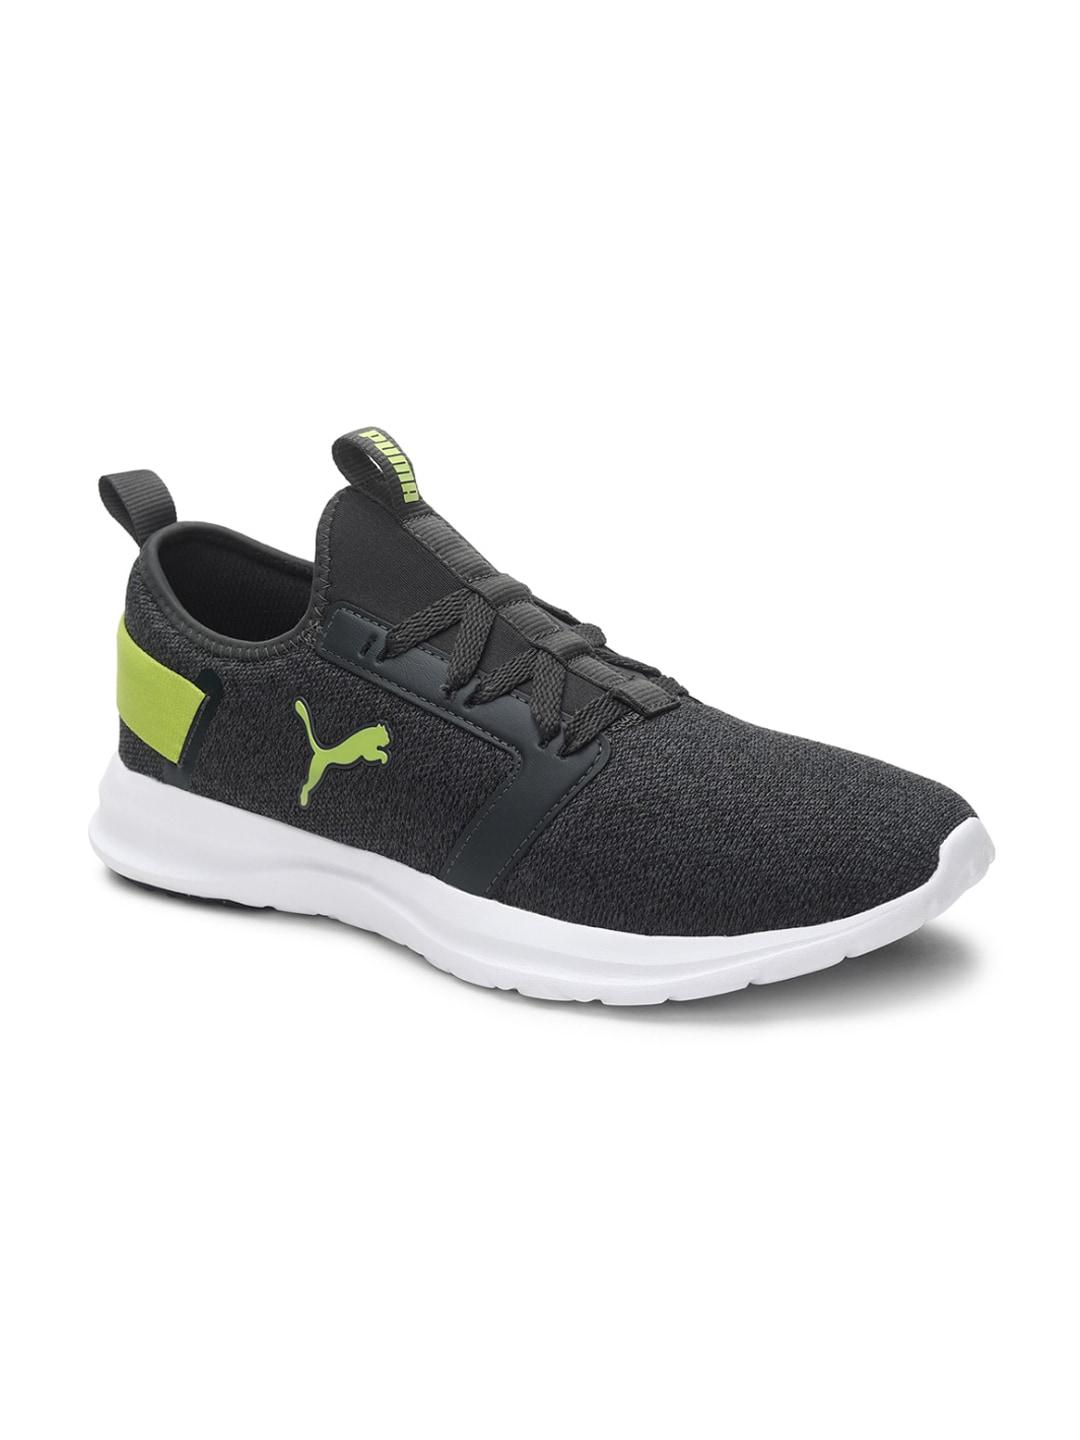 Puma Men Grey & Lime Green Bold Extreme Sneakers